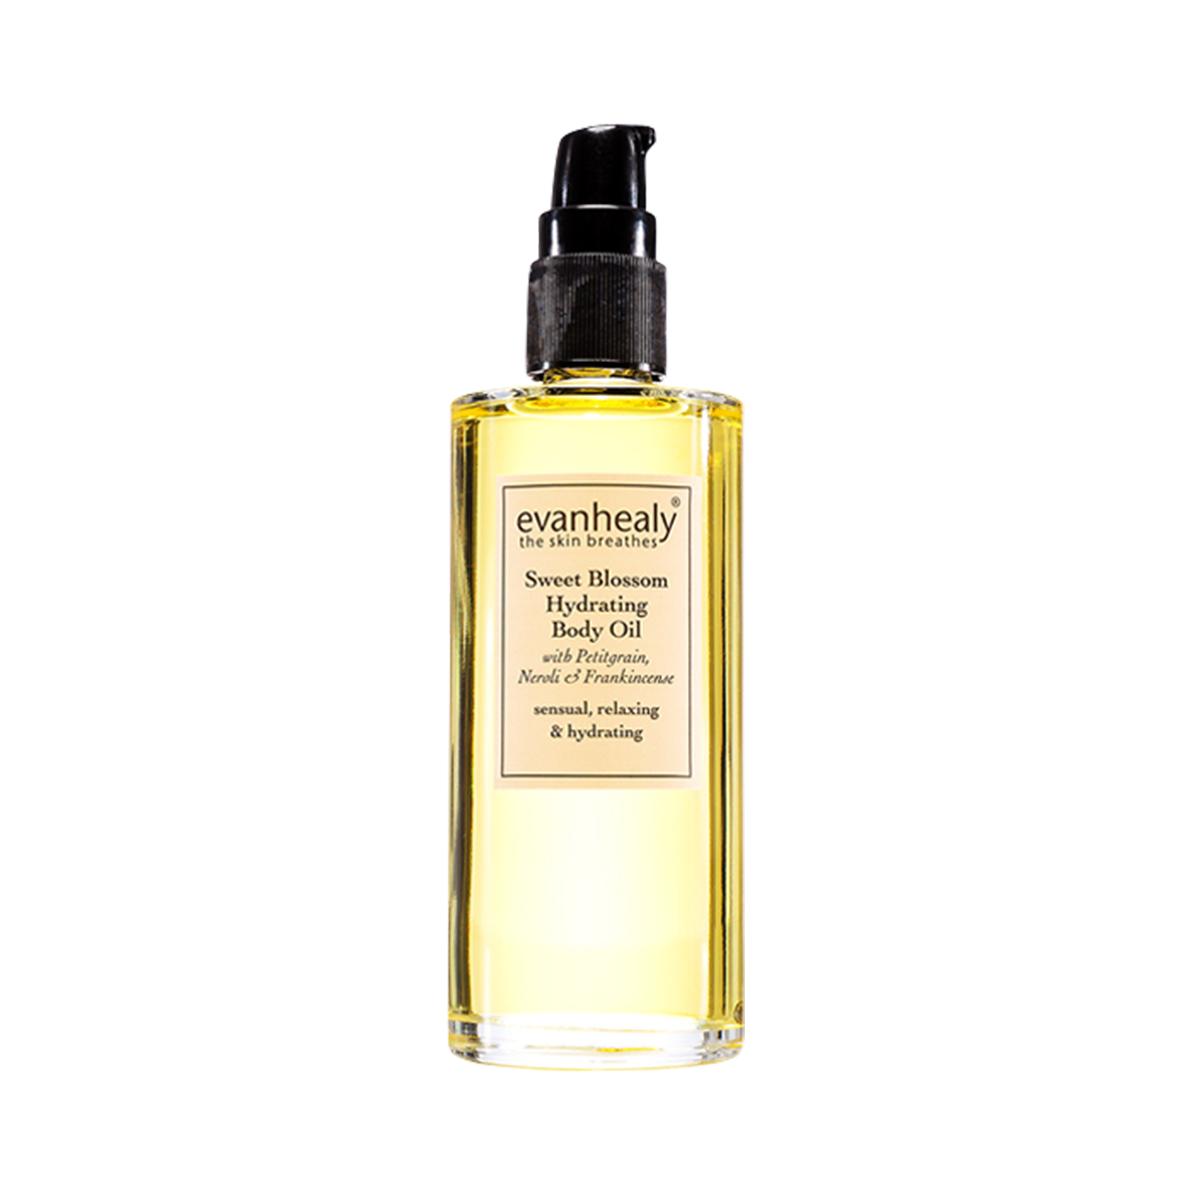 Primary image of Sweet Blossom Hydrating Body Oil